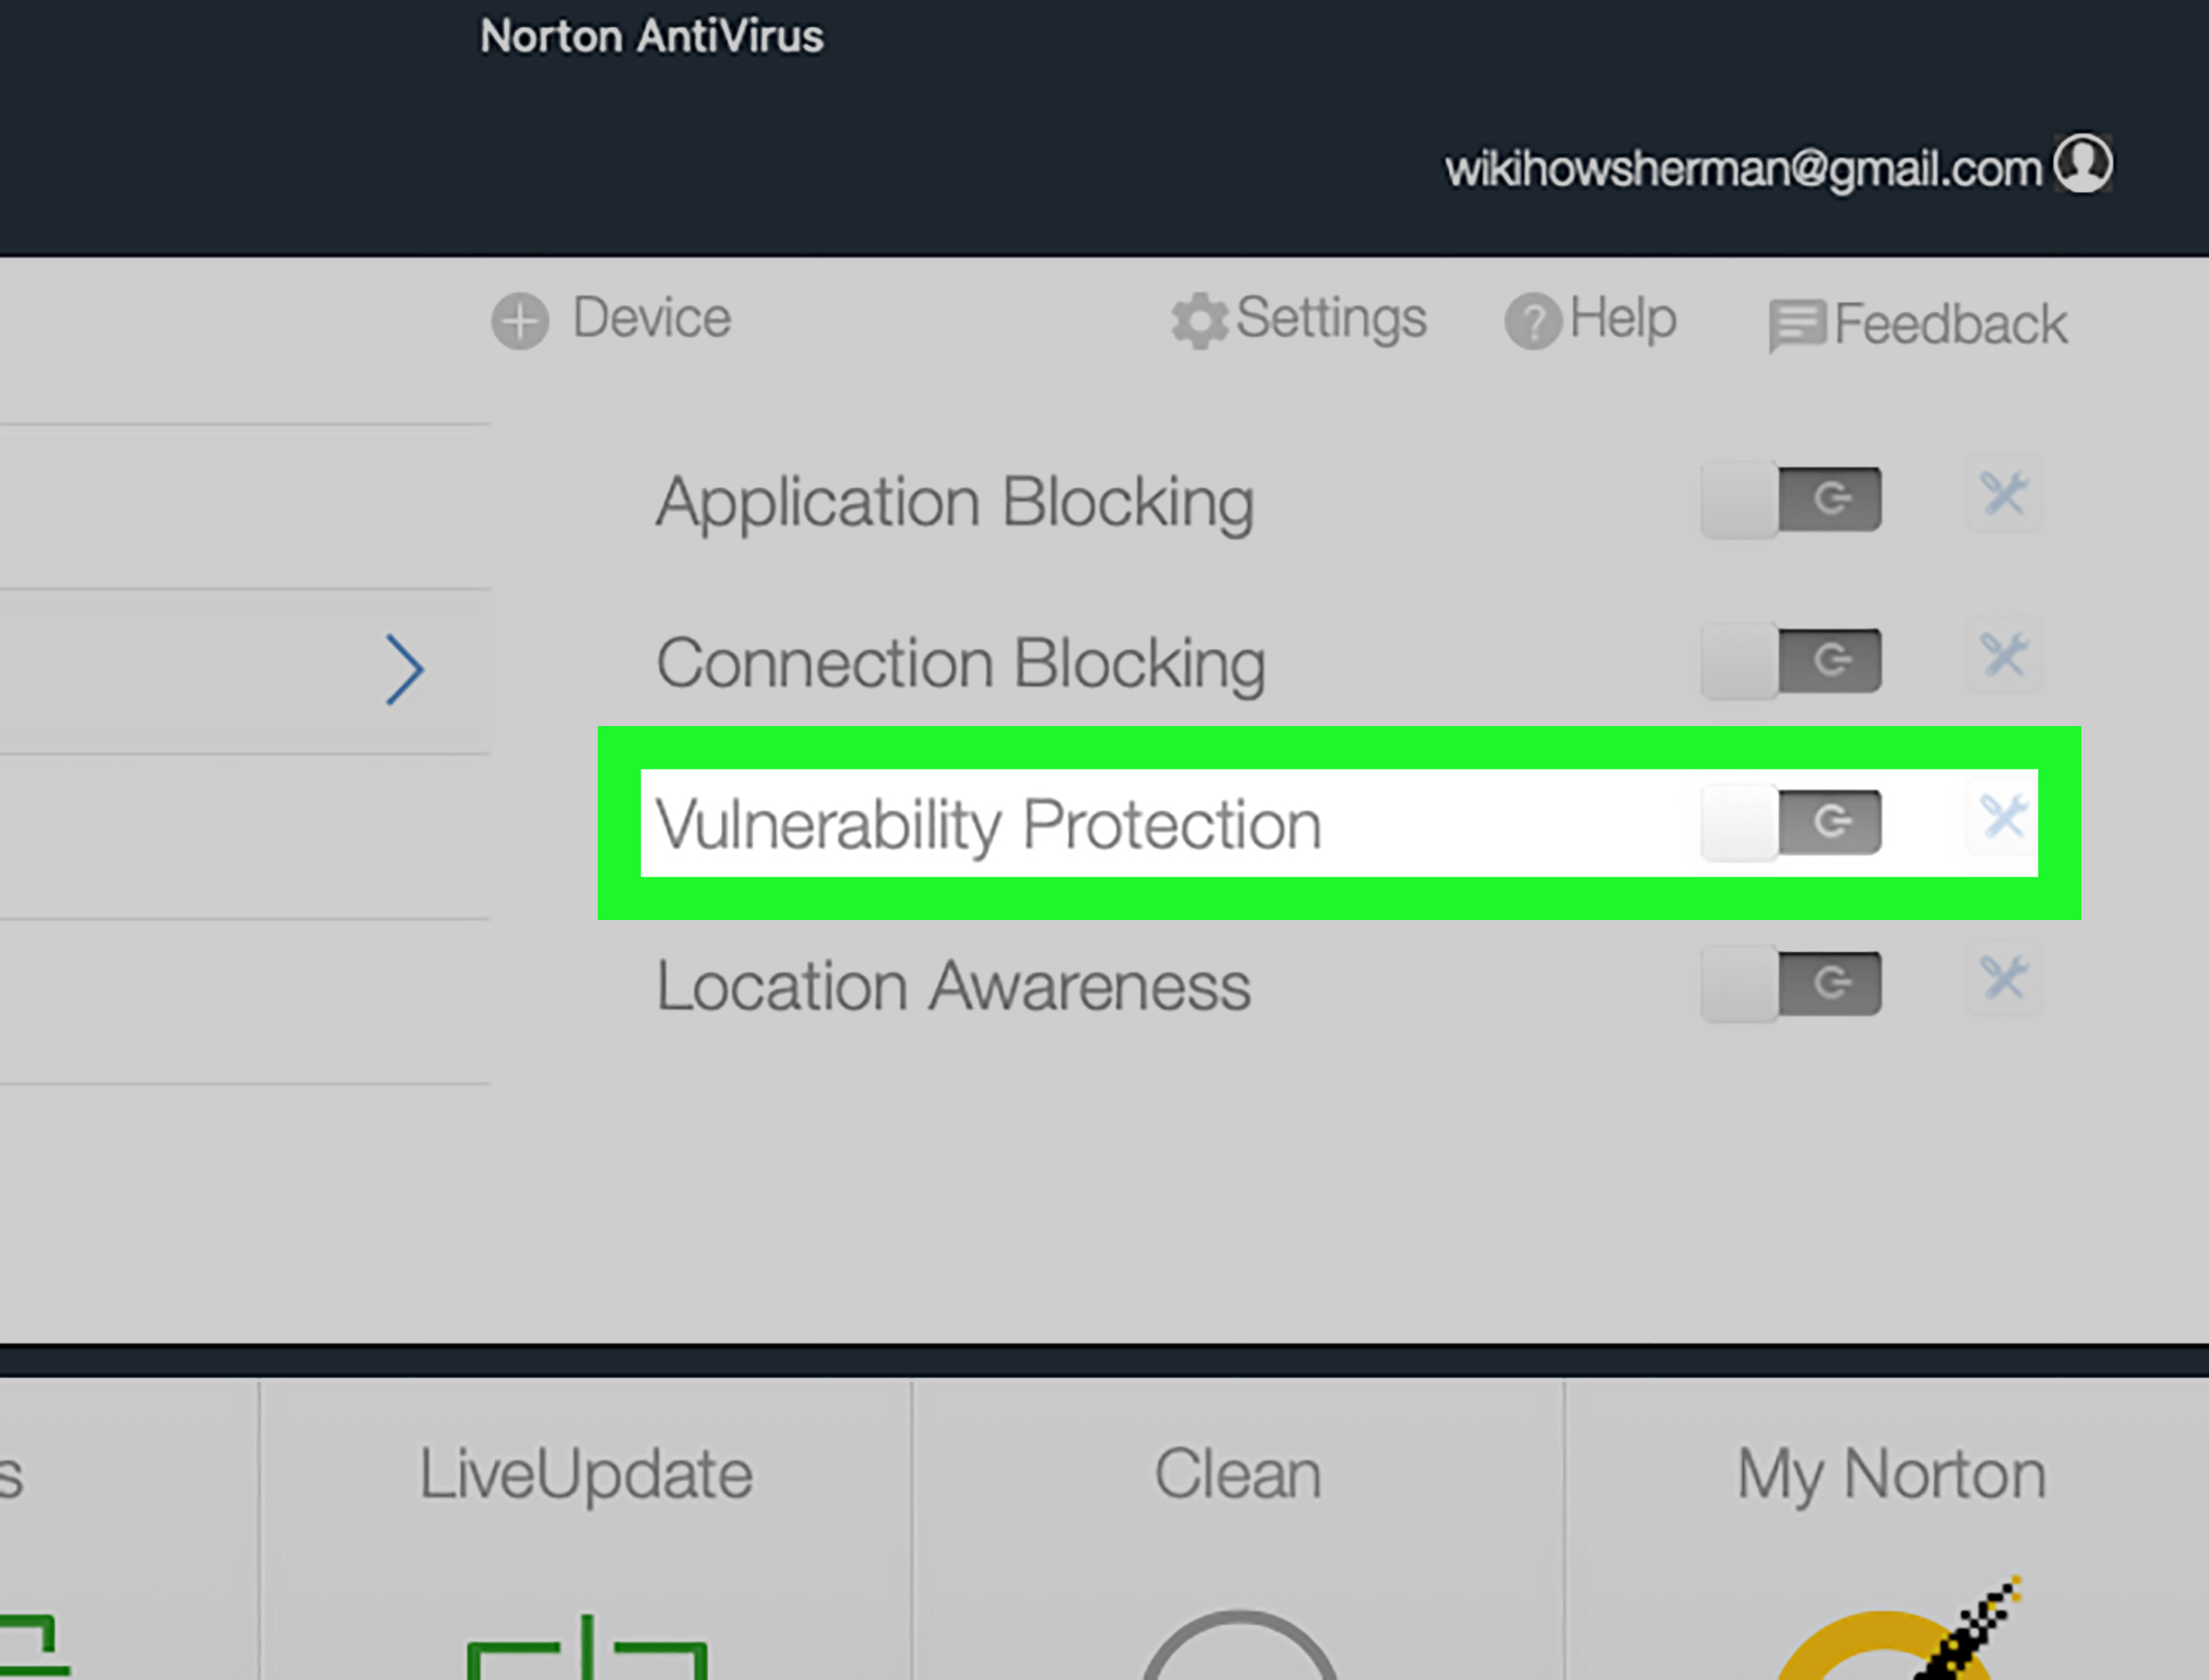 Open your Antivirus/Firewall software.
Locate the options to temporarily disable the protection.